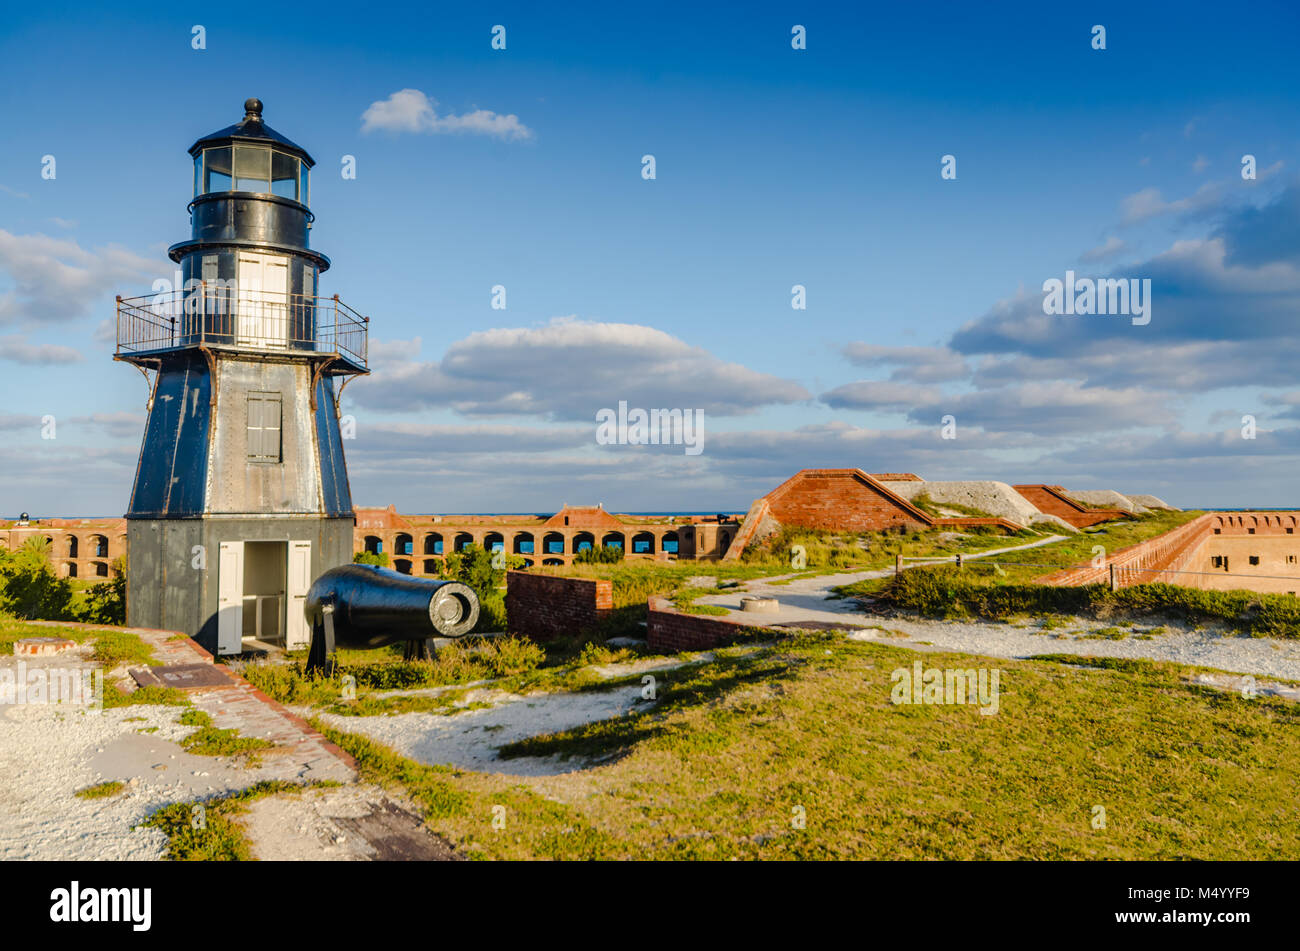 The Garden Key Light, also known as the Tortuga Harbor Light, is located at Fort Jefferson, on Garden Key at Dry Tortugas National Park. Stock Photo